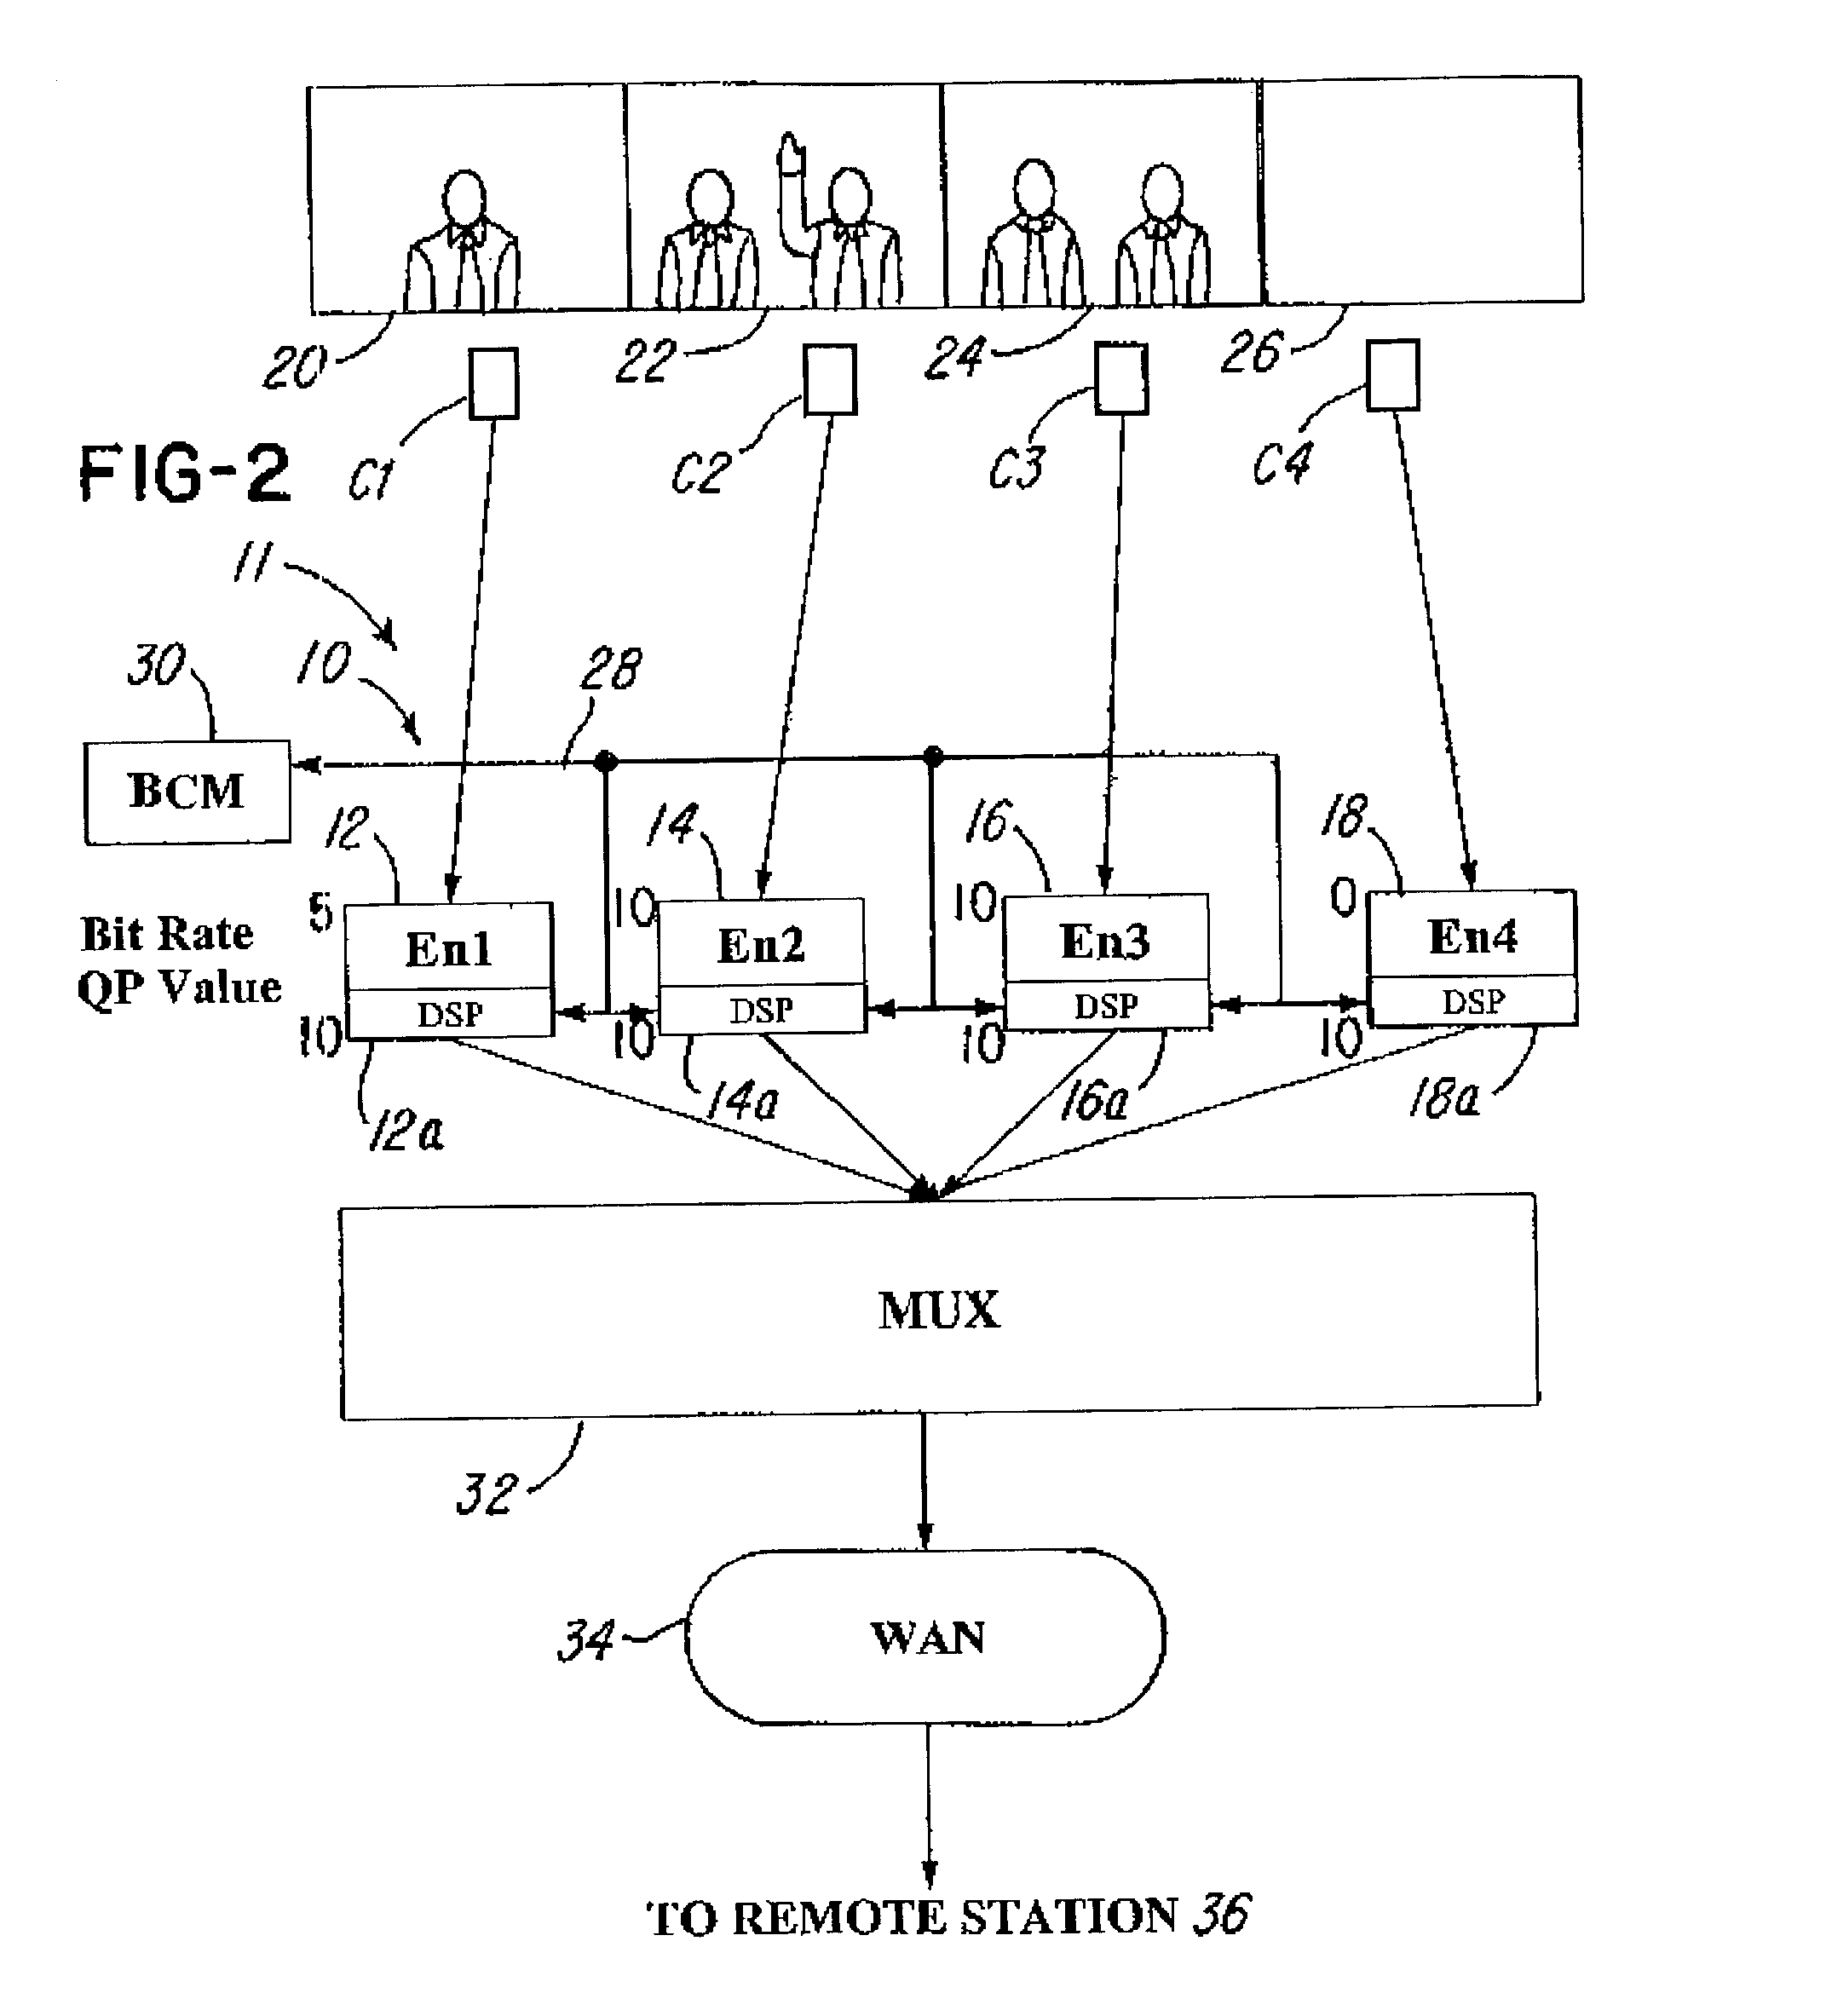 System and method for optimal transmission of a multitude of video pictures to one or more destinations